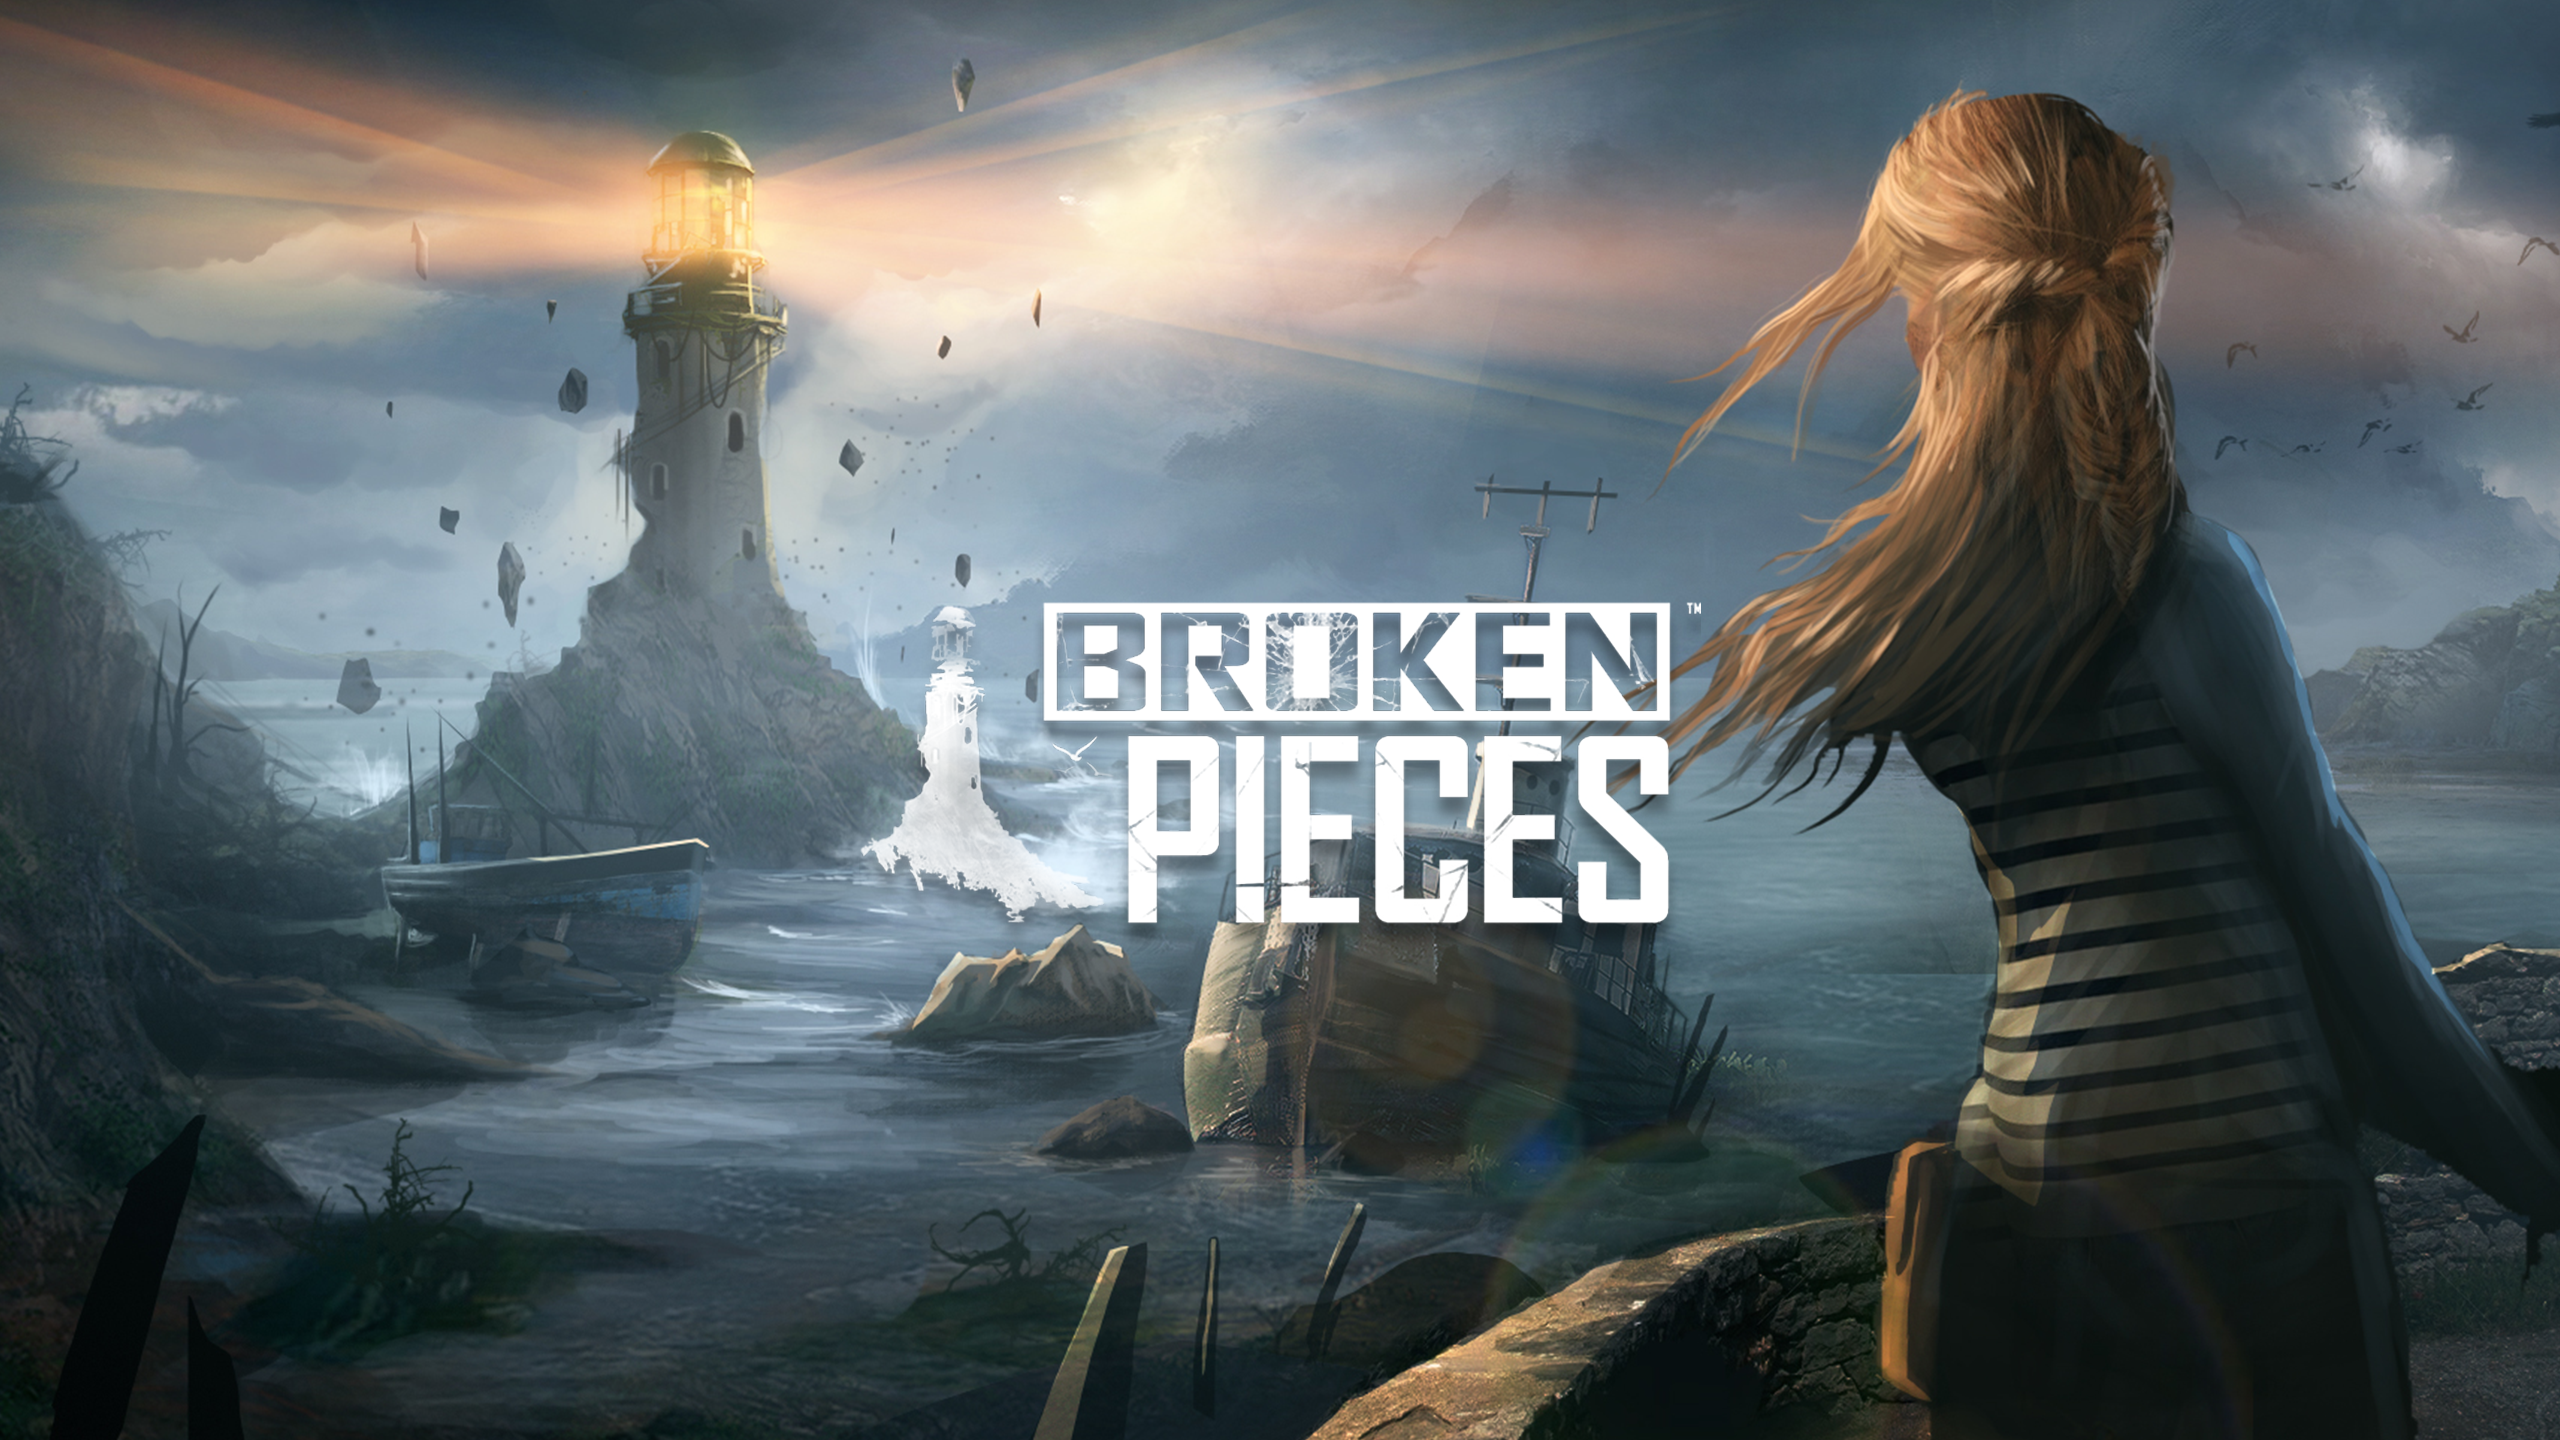 cover art of broken pieces where Elise look at lighthouse in the distance